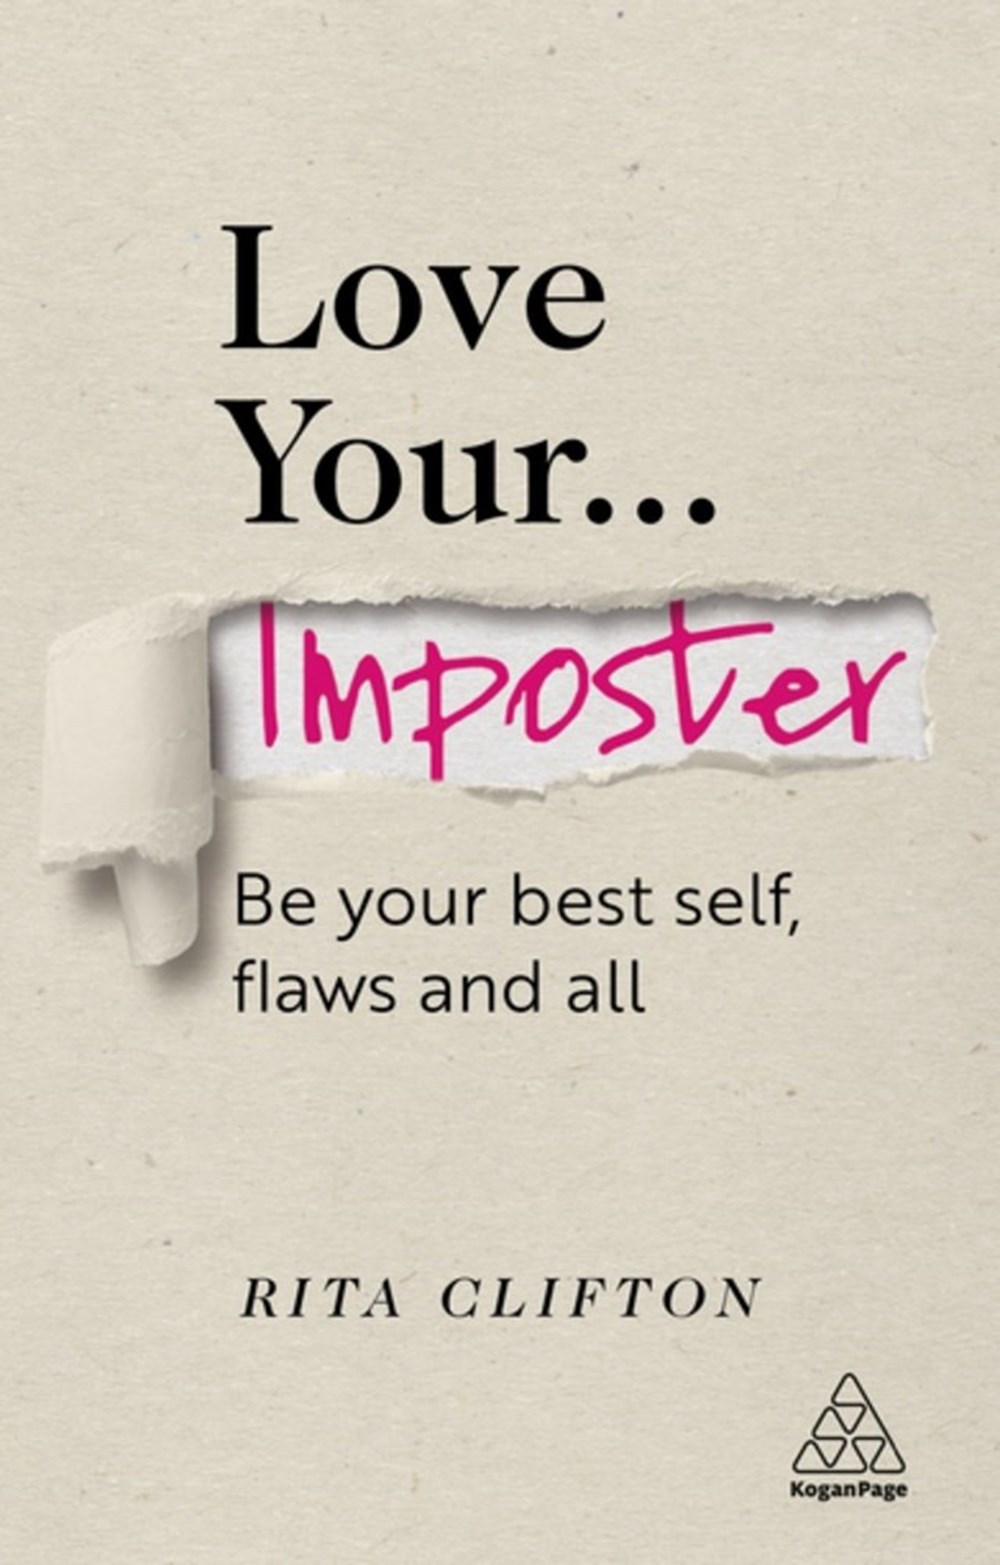 Love Your Imposter Be Your Best Self, Flaws and All